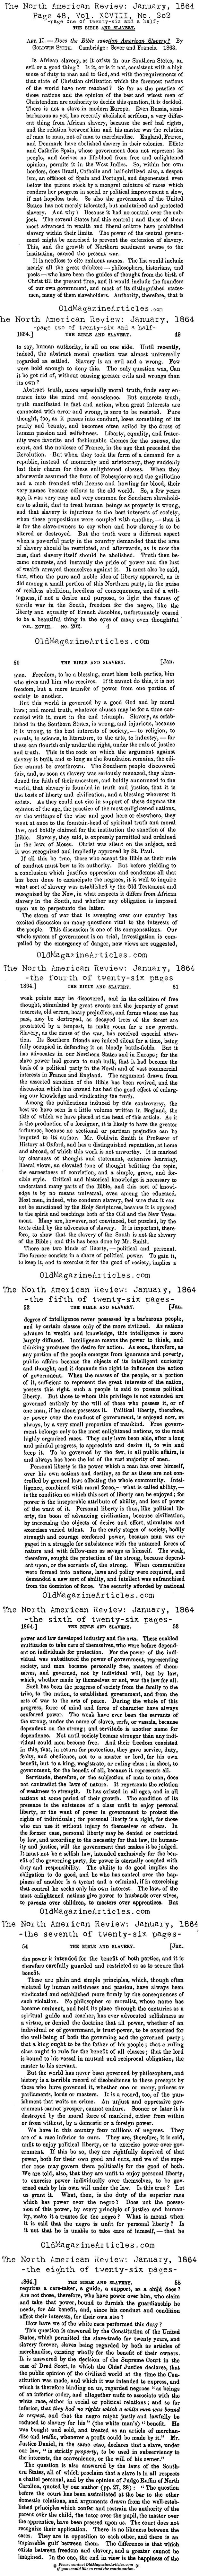 The Bible and Slavery   (The North American Review, 1864)